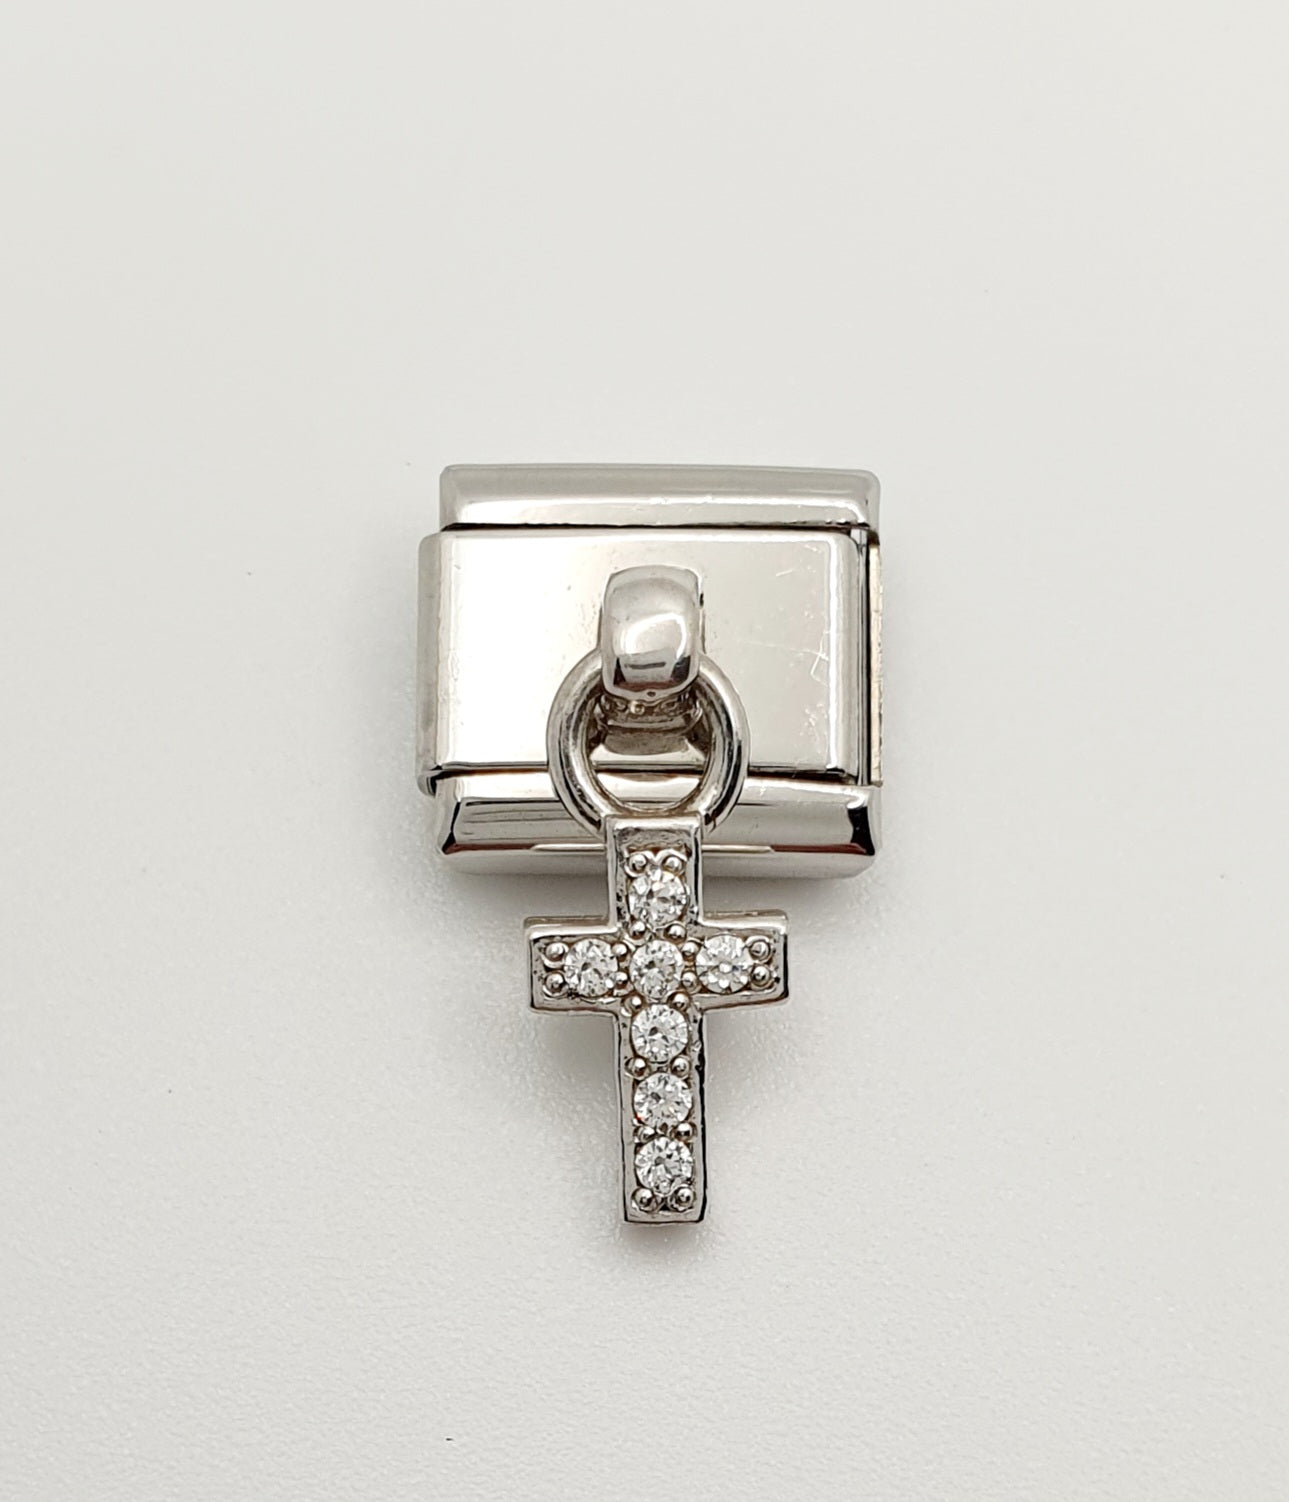 Nomination Charm Link "Cross Charm" Stainless Steel with CZ's & 925 Silver, 331800 04